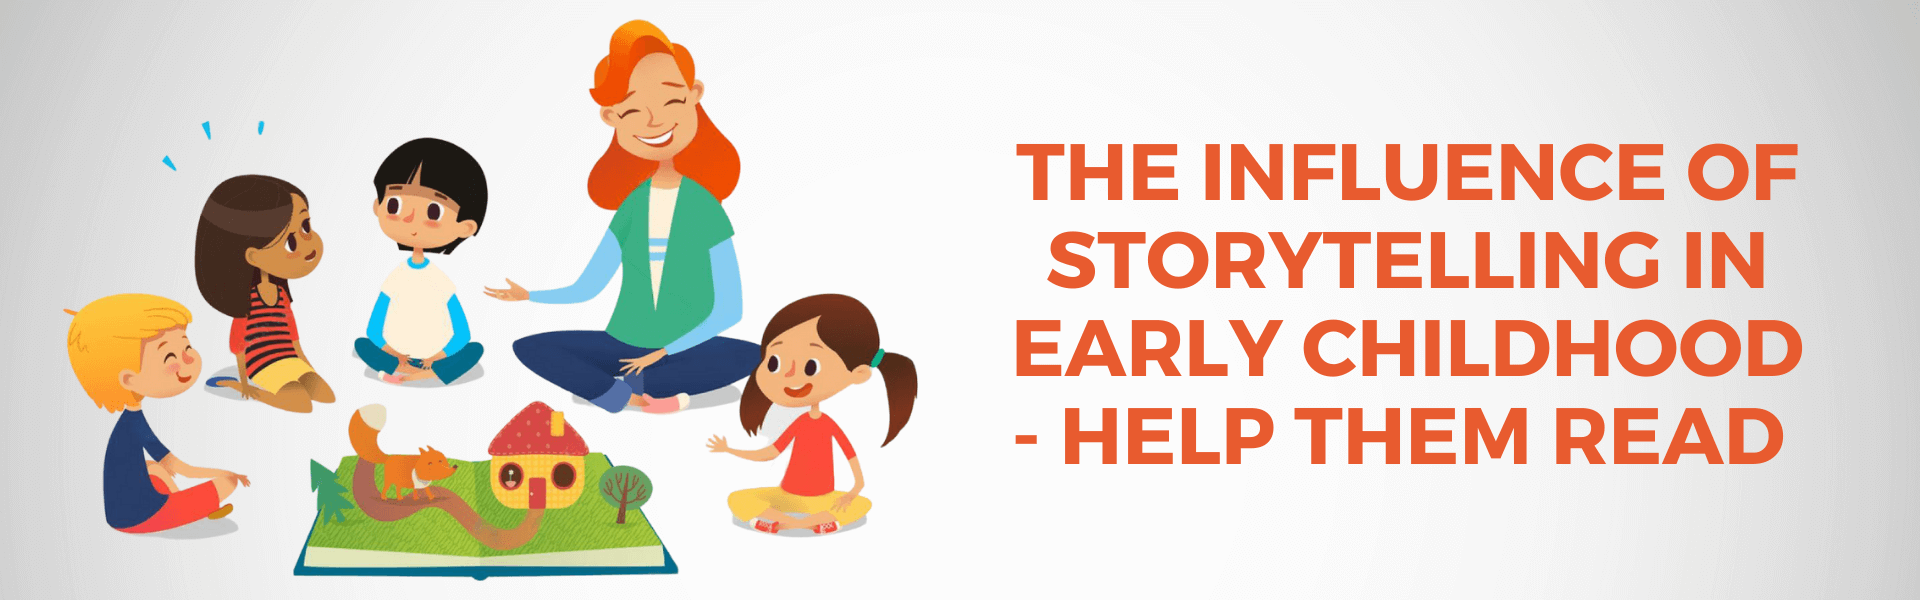 The influence of storytelling in early childhood